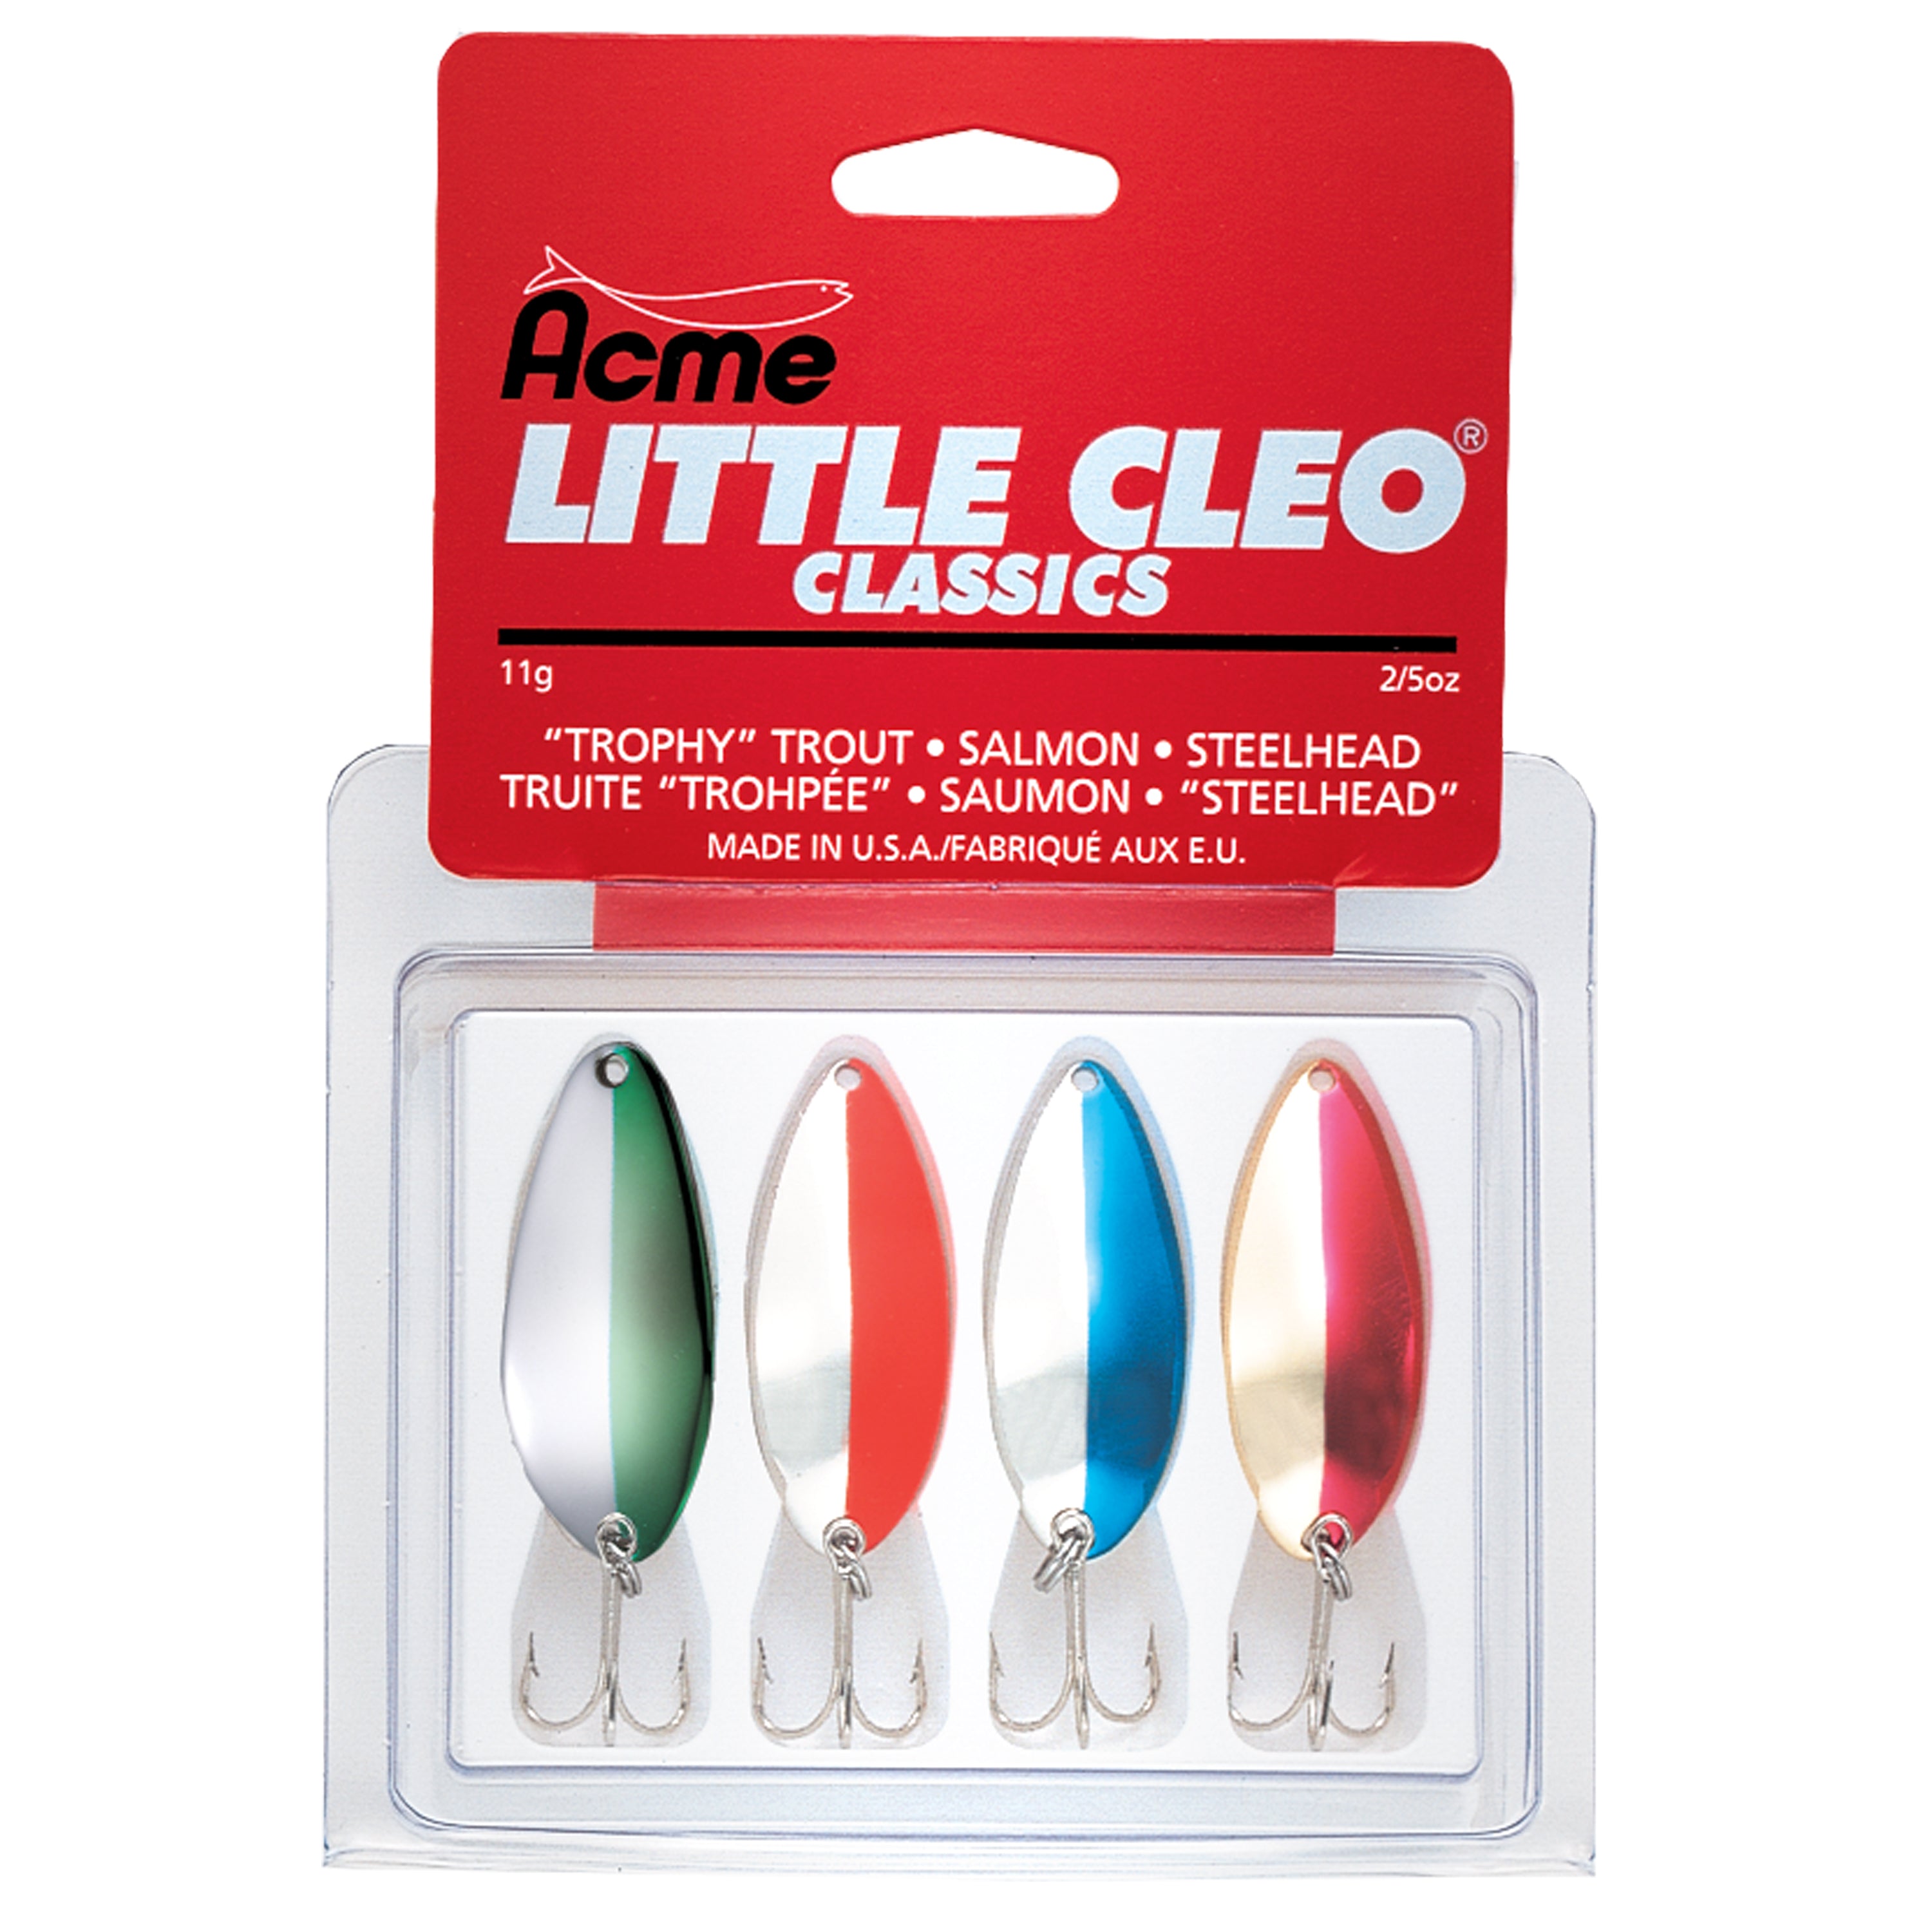 Acme Lures Little Cleo Spoon, Nickel Blue, 0.4 oz